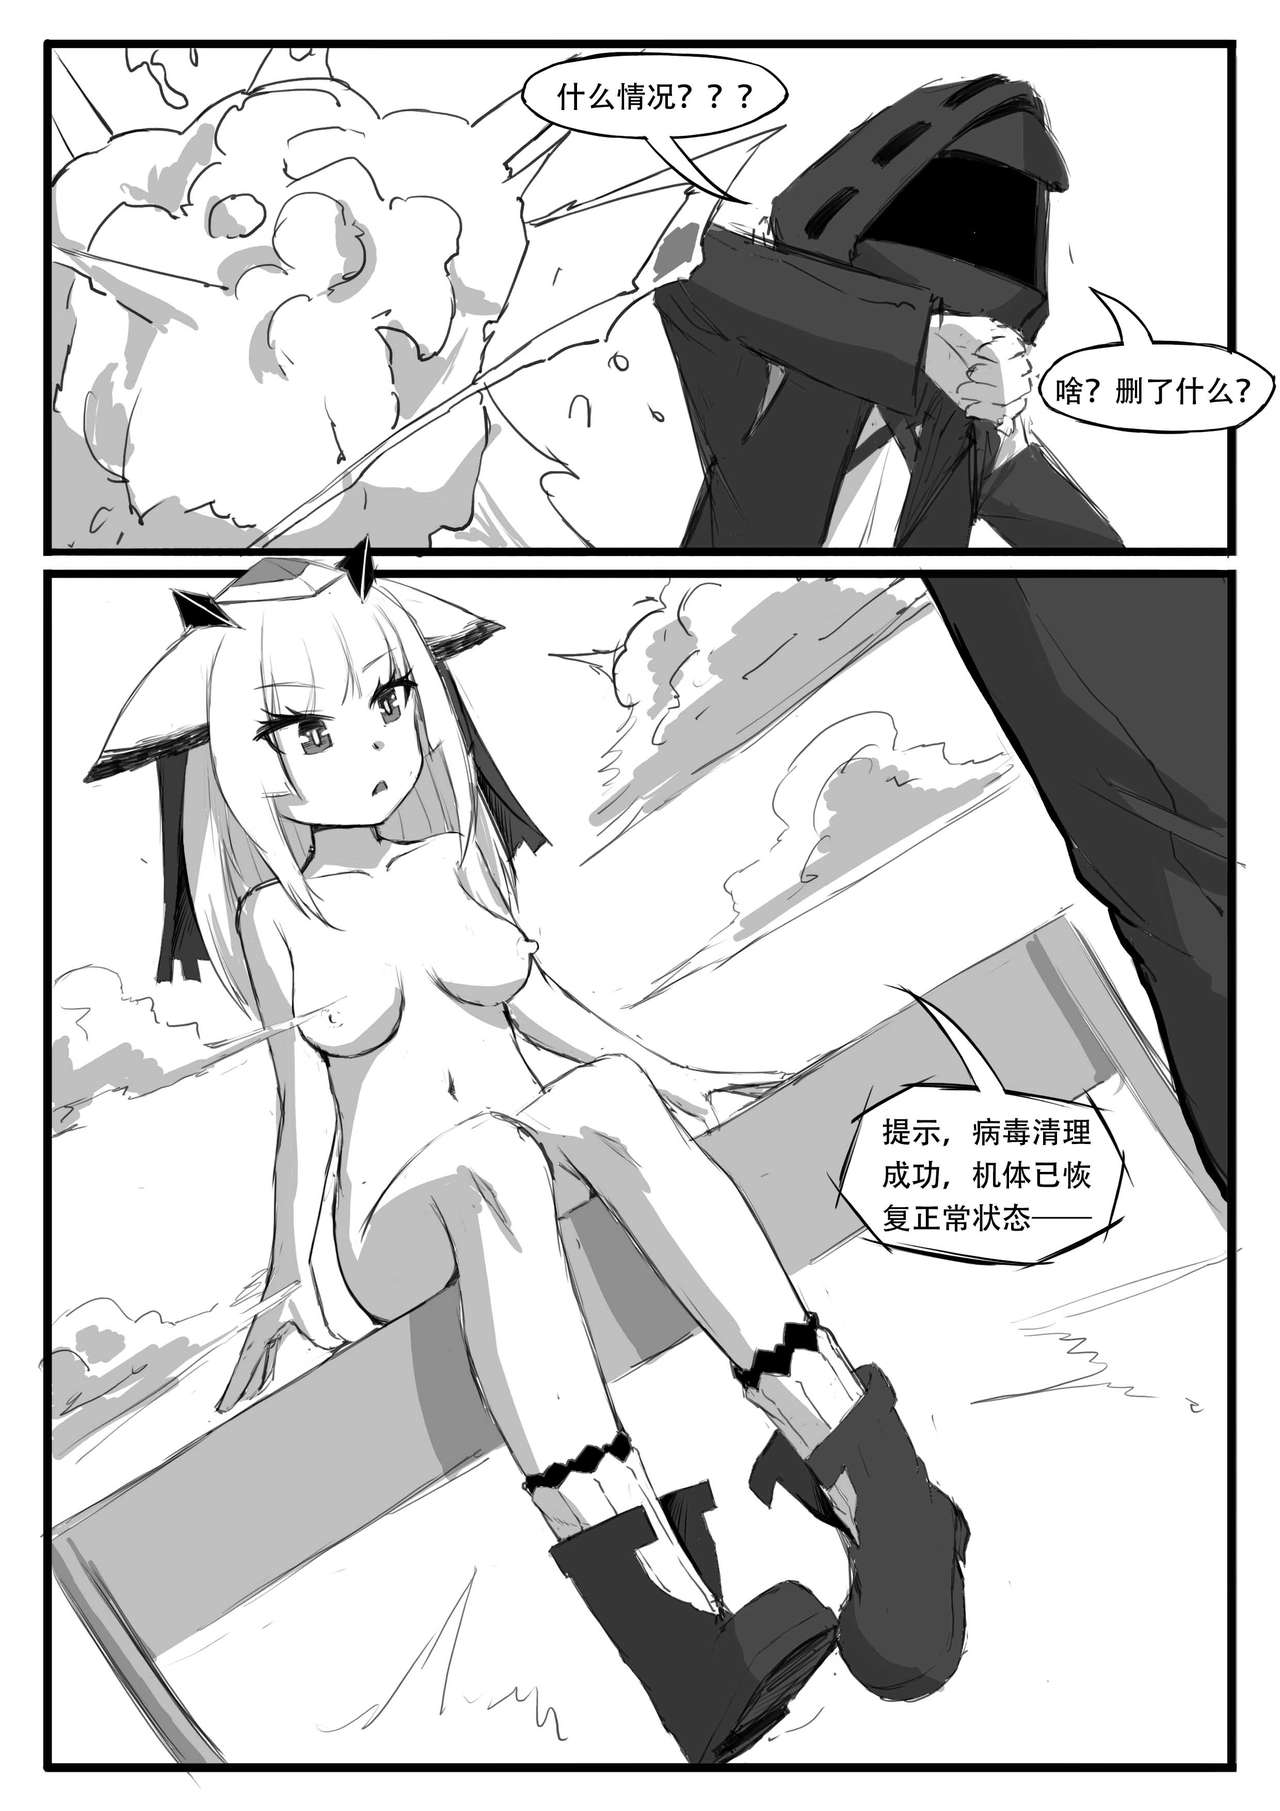 [saluky] 关于白面鸮变成了幼女这件事 (Arknights) [Chinese] page 25 full